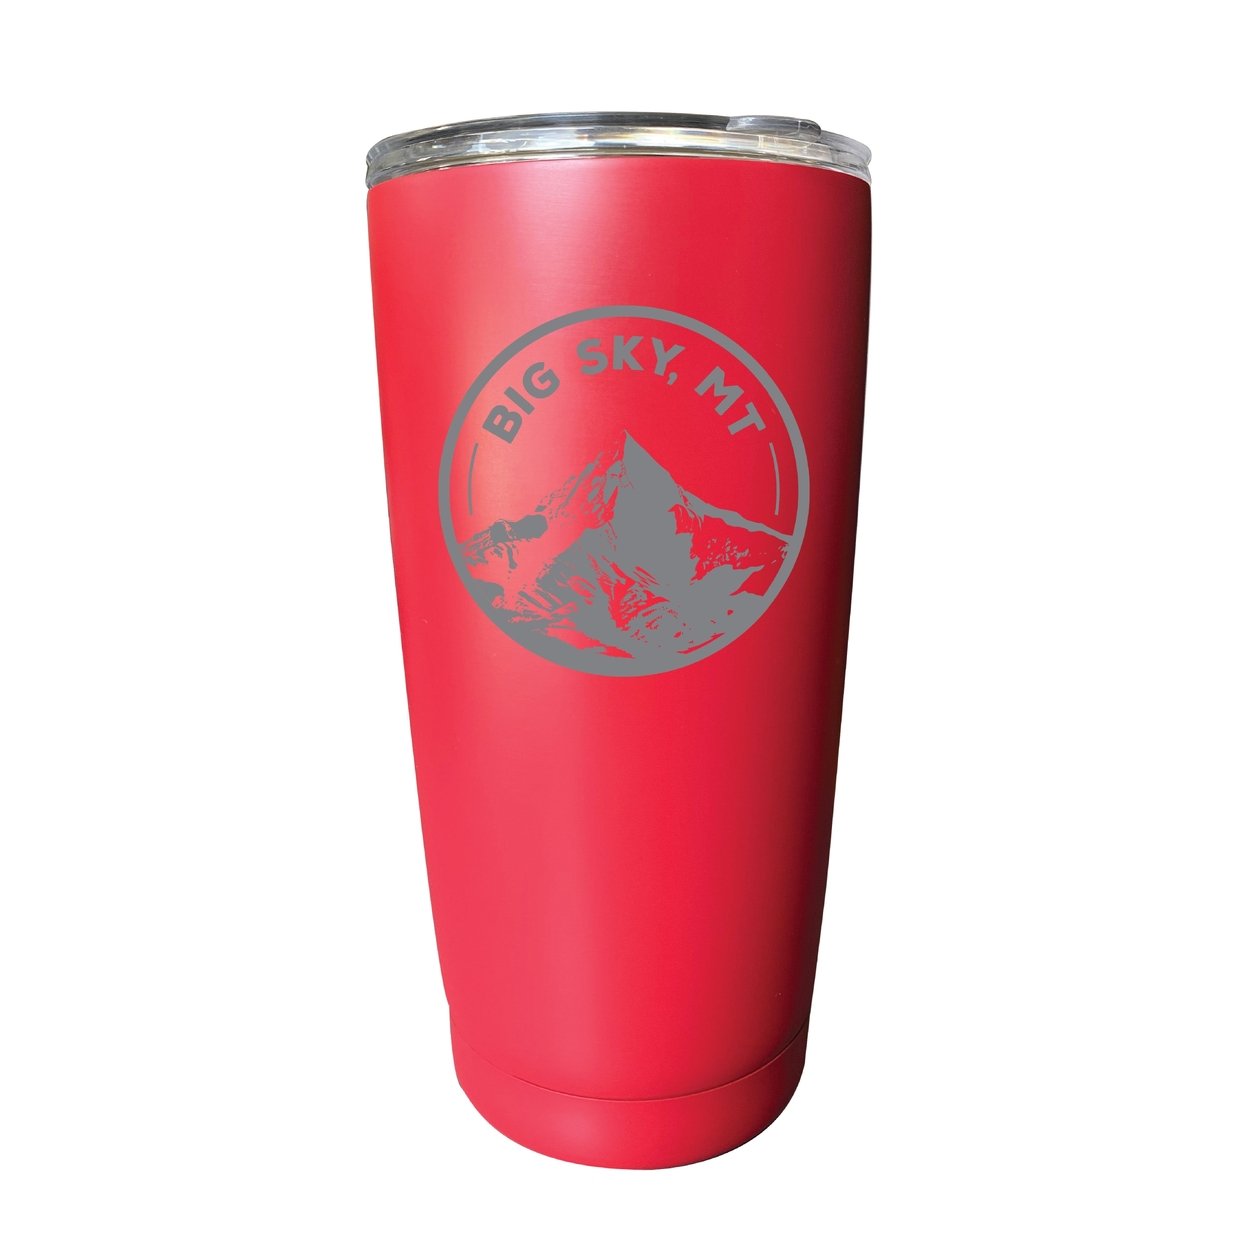 Big Sky Montana Souvenir 16 Oz Engraved Stainless Steel Insulated Tumbler - Red,,4-Pack